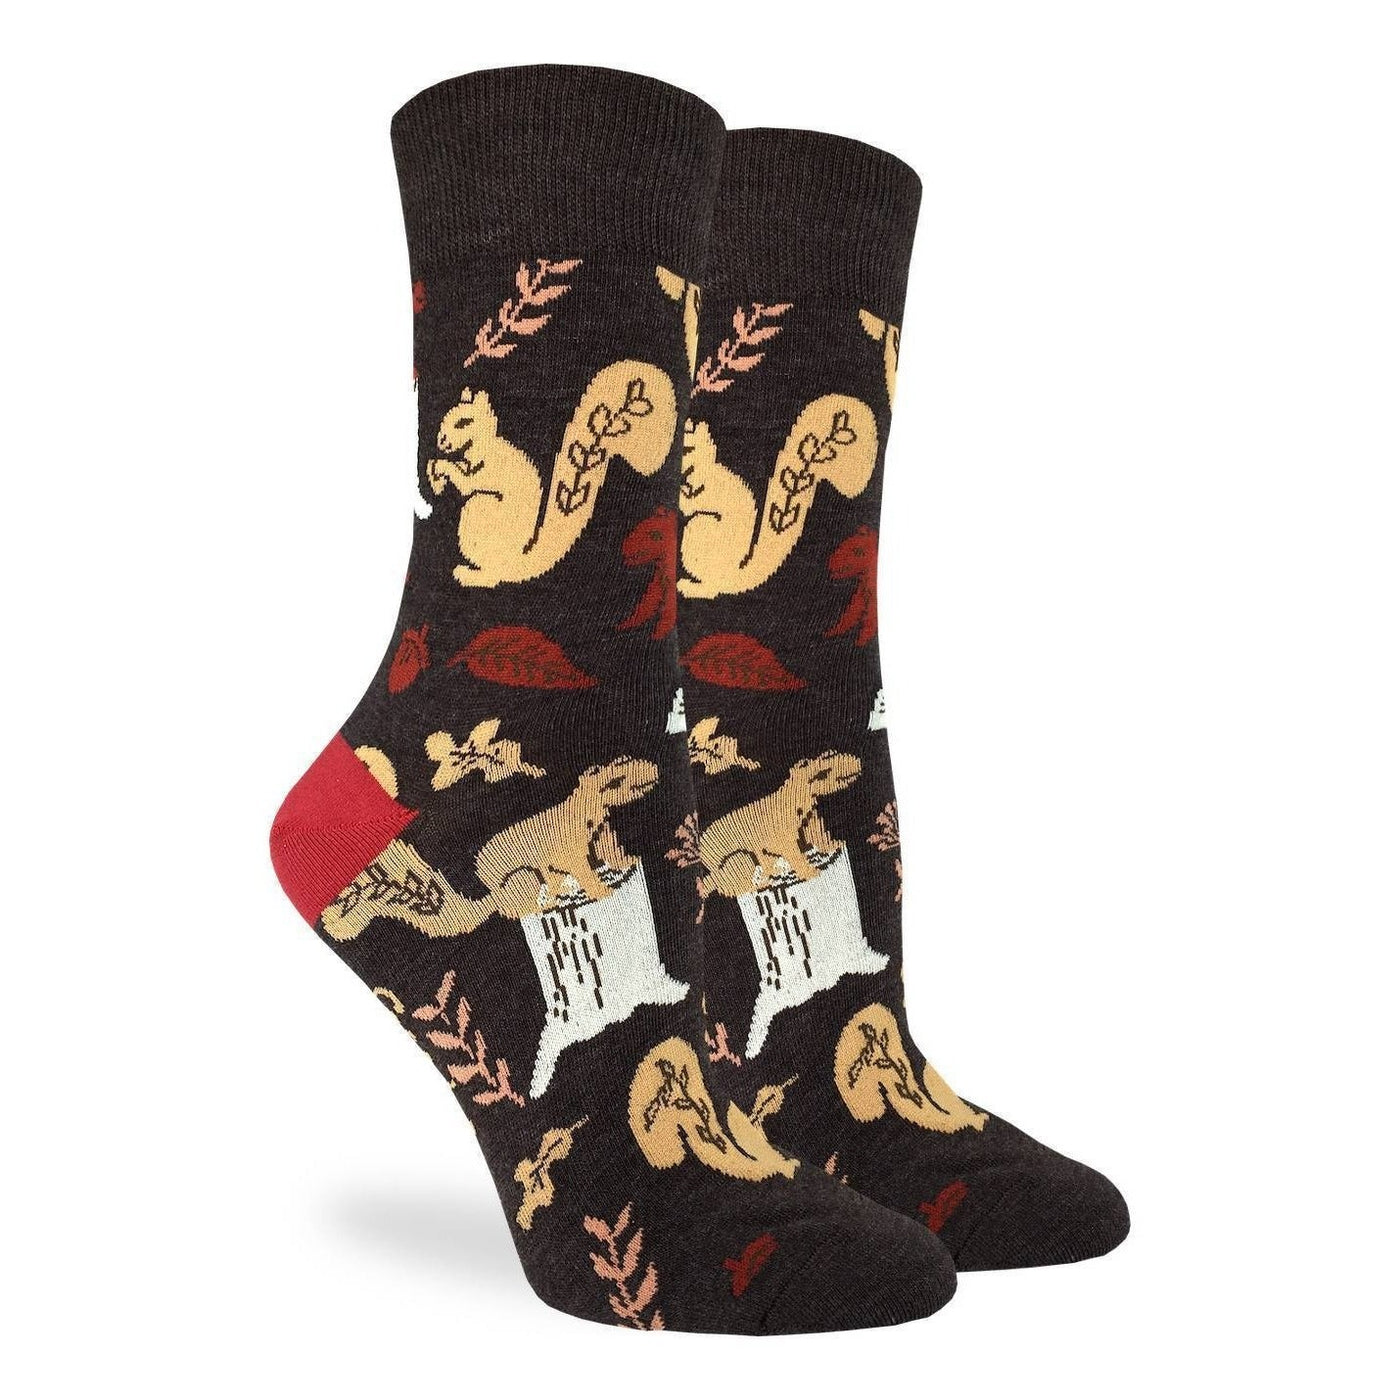 "Woodland Squirrel" Cotton Crew Socks by Good Luck Sock